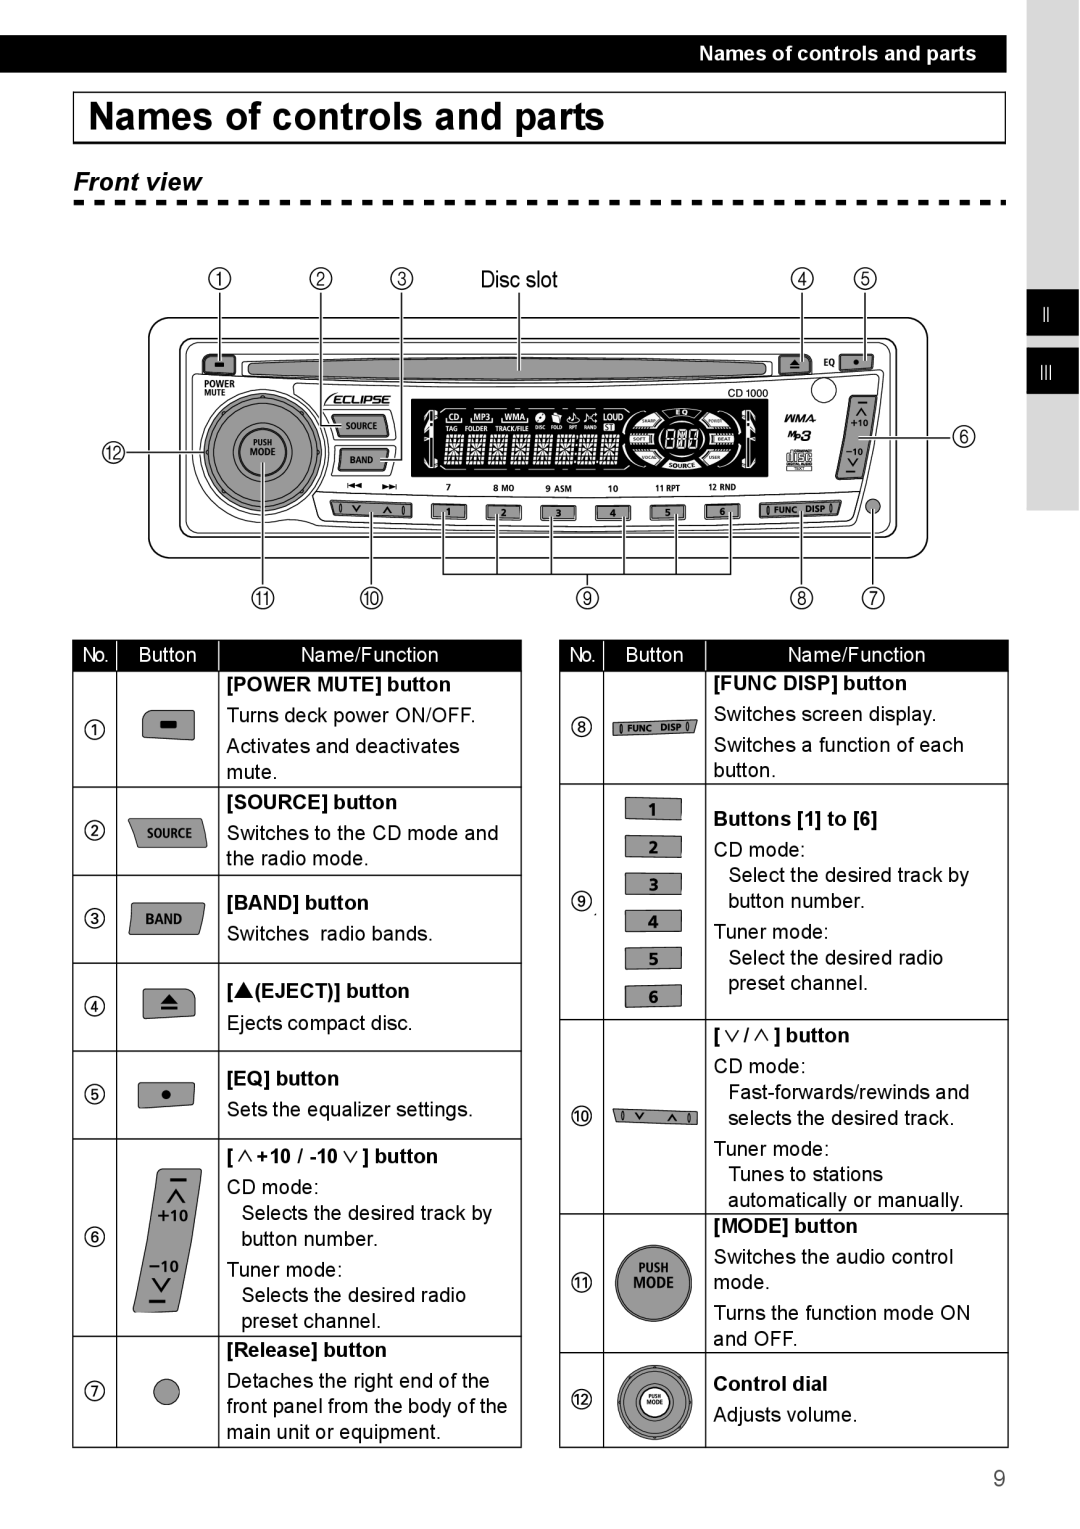 Eclipse - Fujitsu Ten CD1000 manual Names of controls and parts, Front view, 2 3 Disc slot, Ii, No. Button, Name/Function 